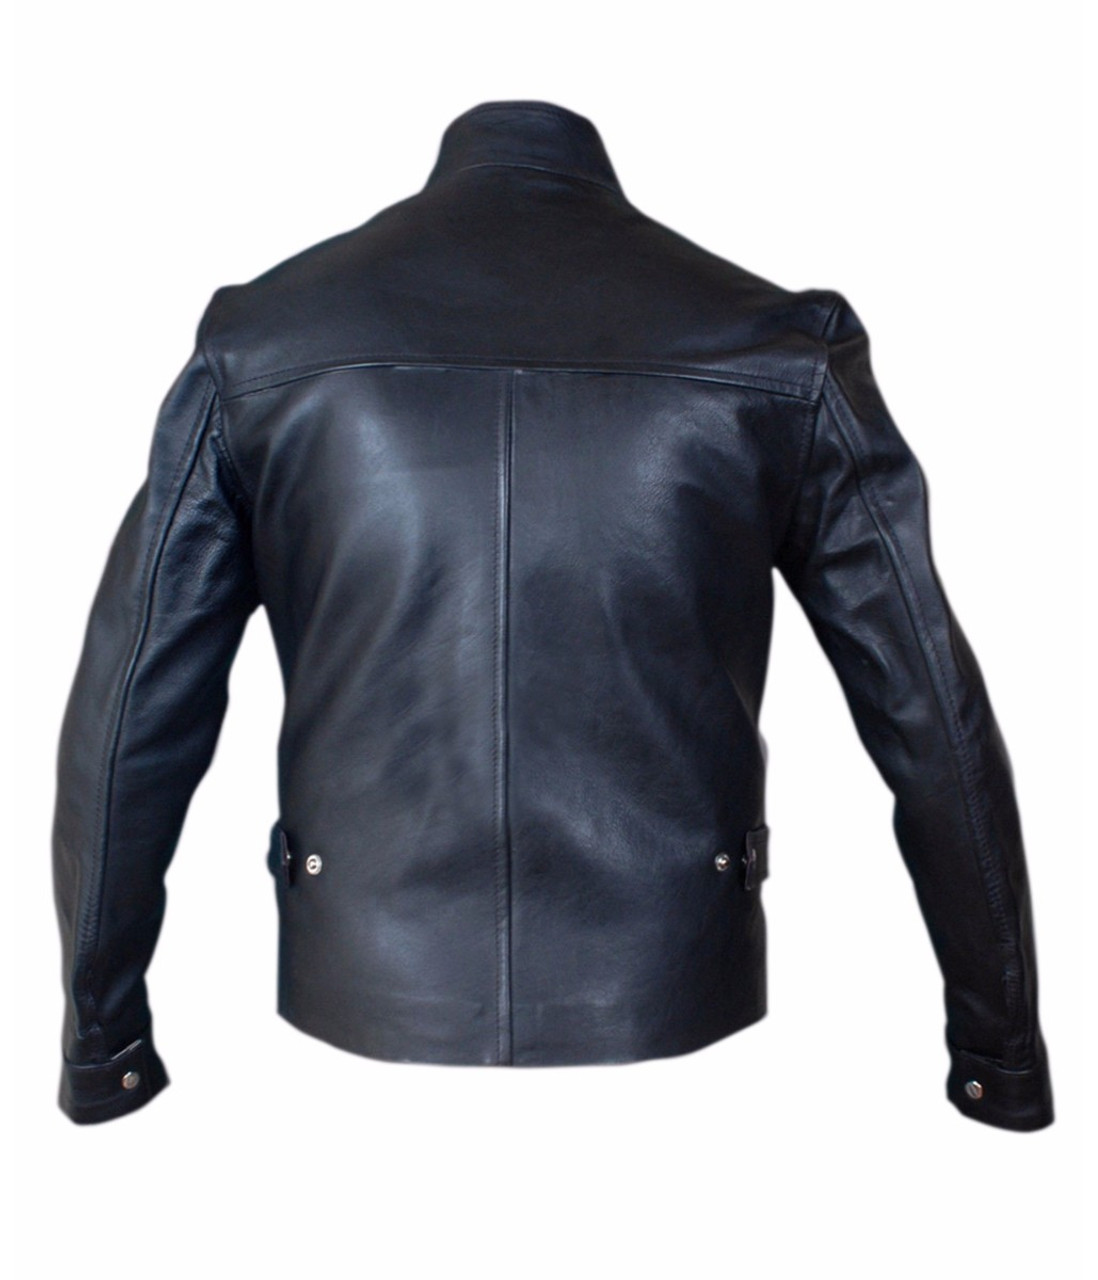 Fast and Furious 6 Dominic Toretto Vin Diesel Black Leather Jacket ...